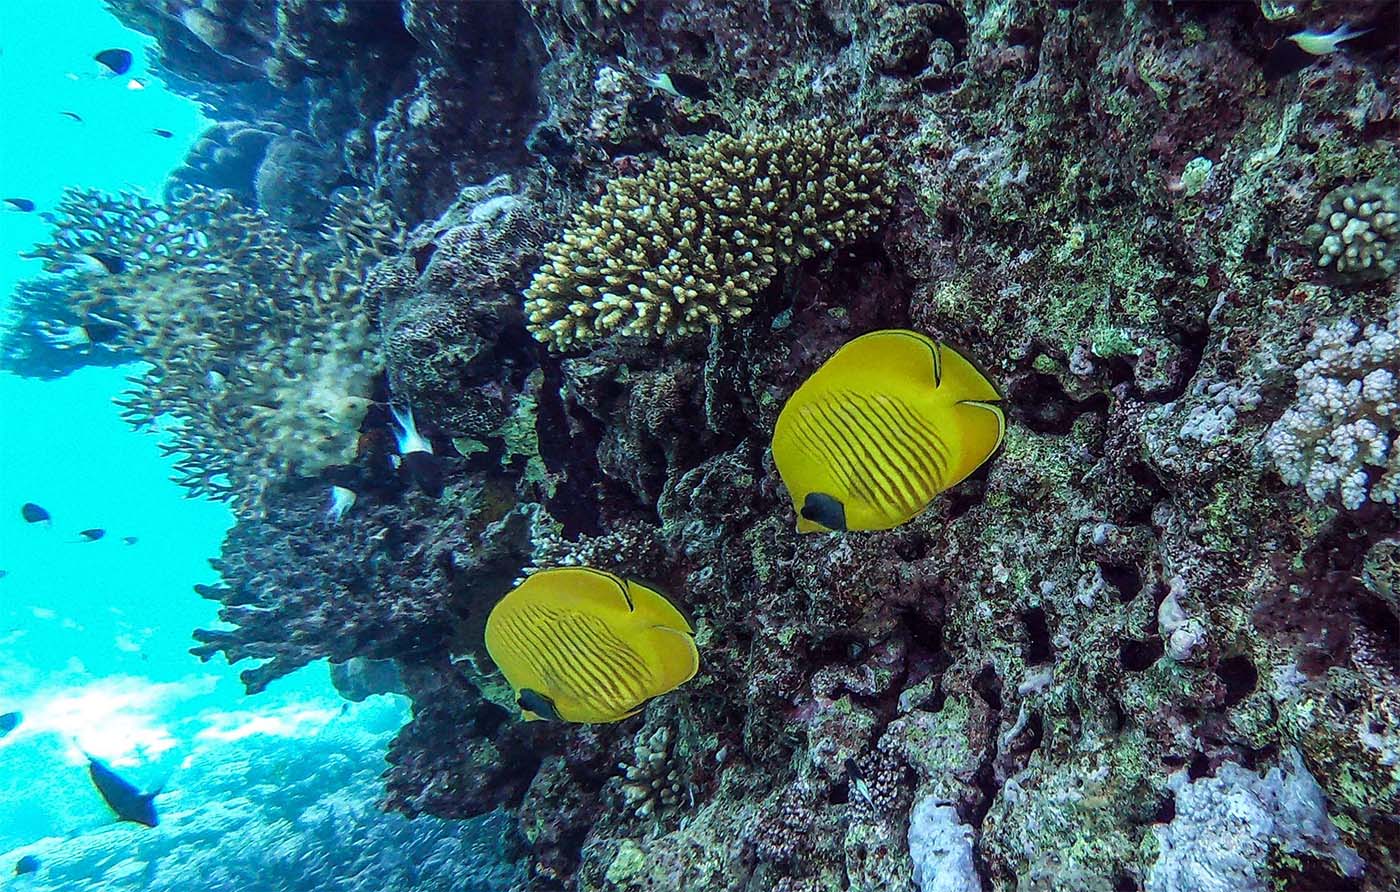 Scientists consider the Red Sea's reefs the most climate change-resilient corals 